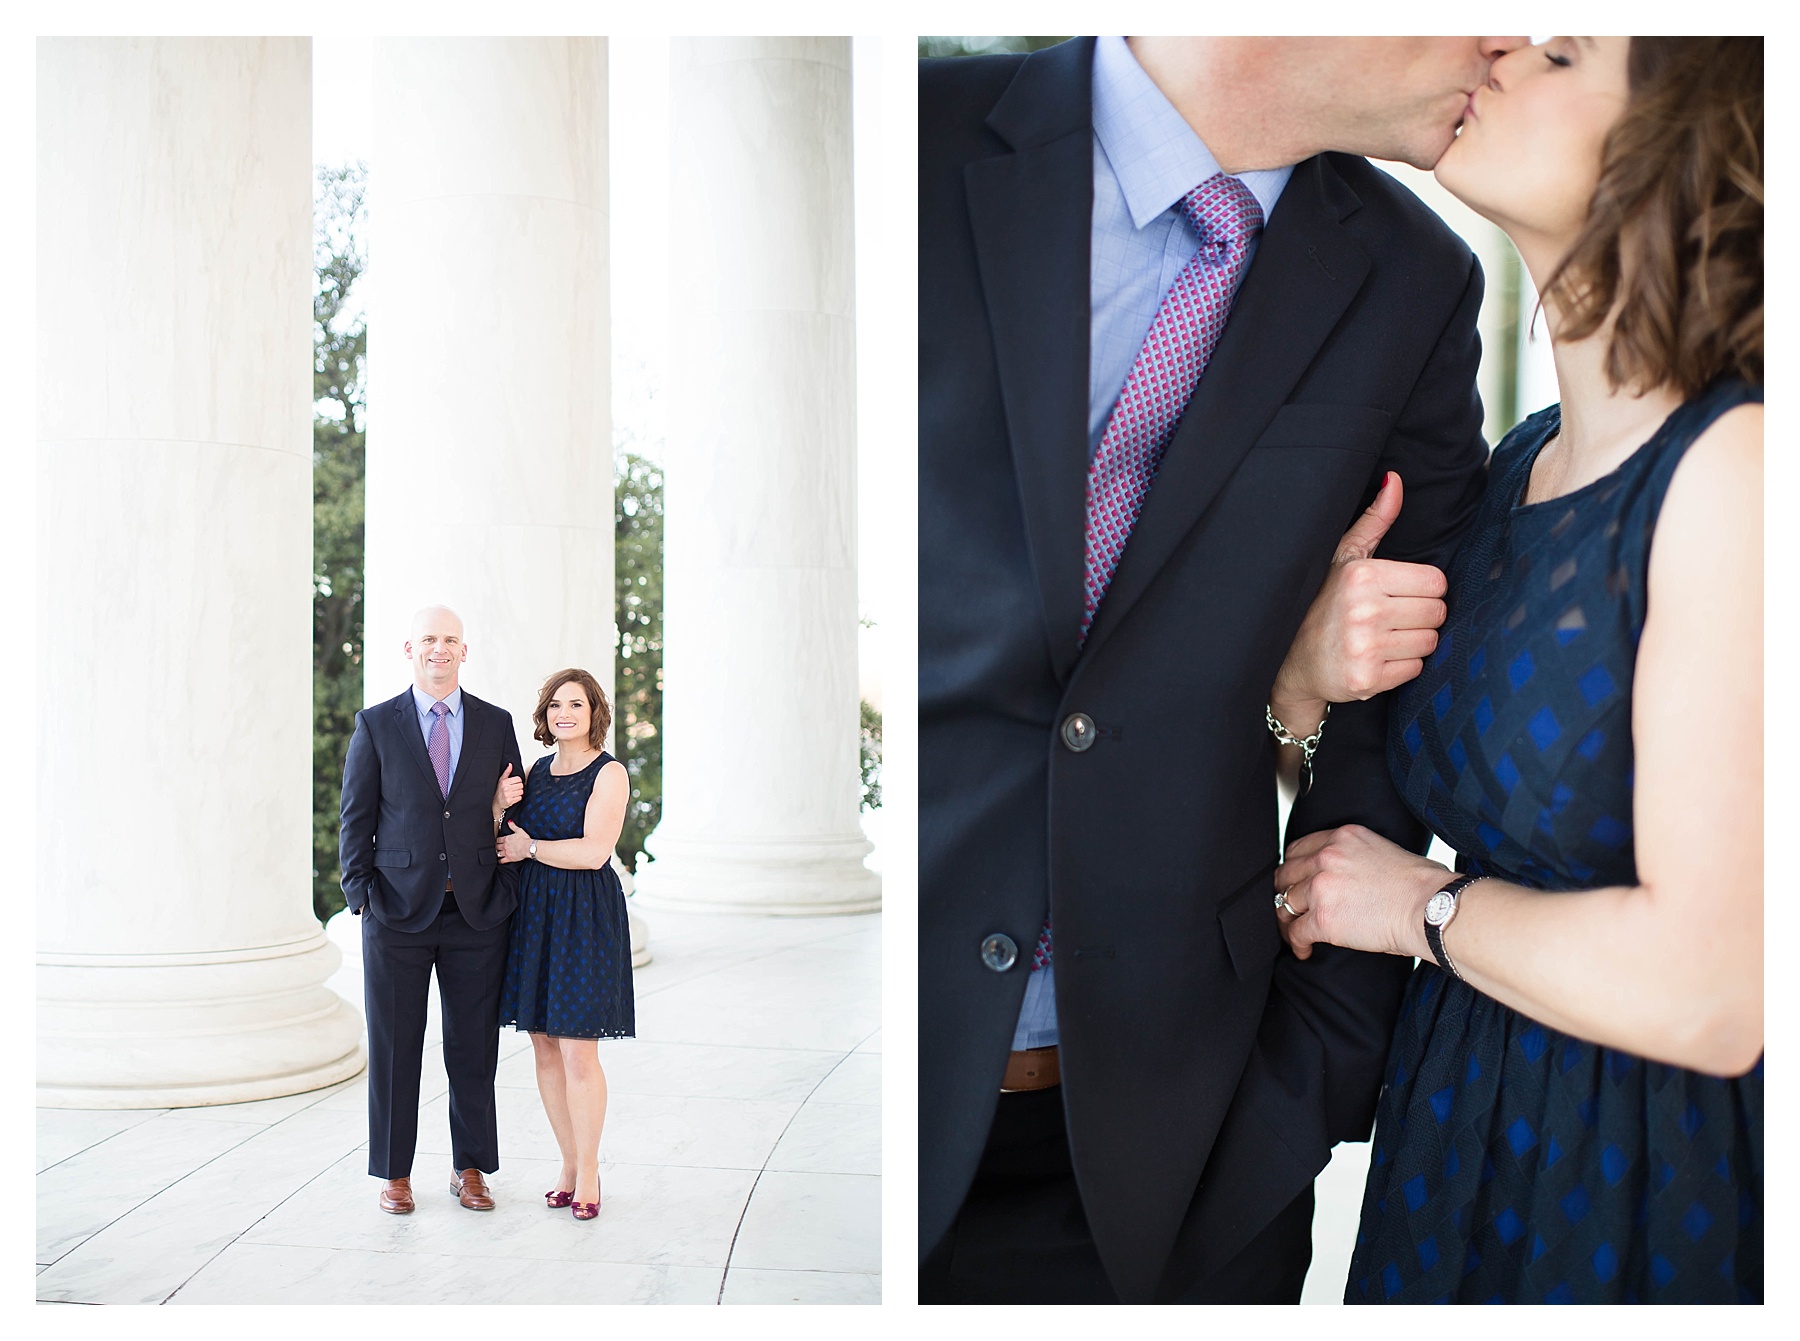 Candice Adelle Photography DC Destination Wedding Photographer Cherry Blossom Engagment Session_0038.jpg